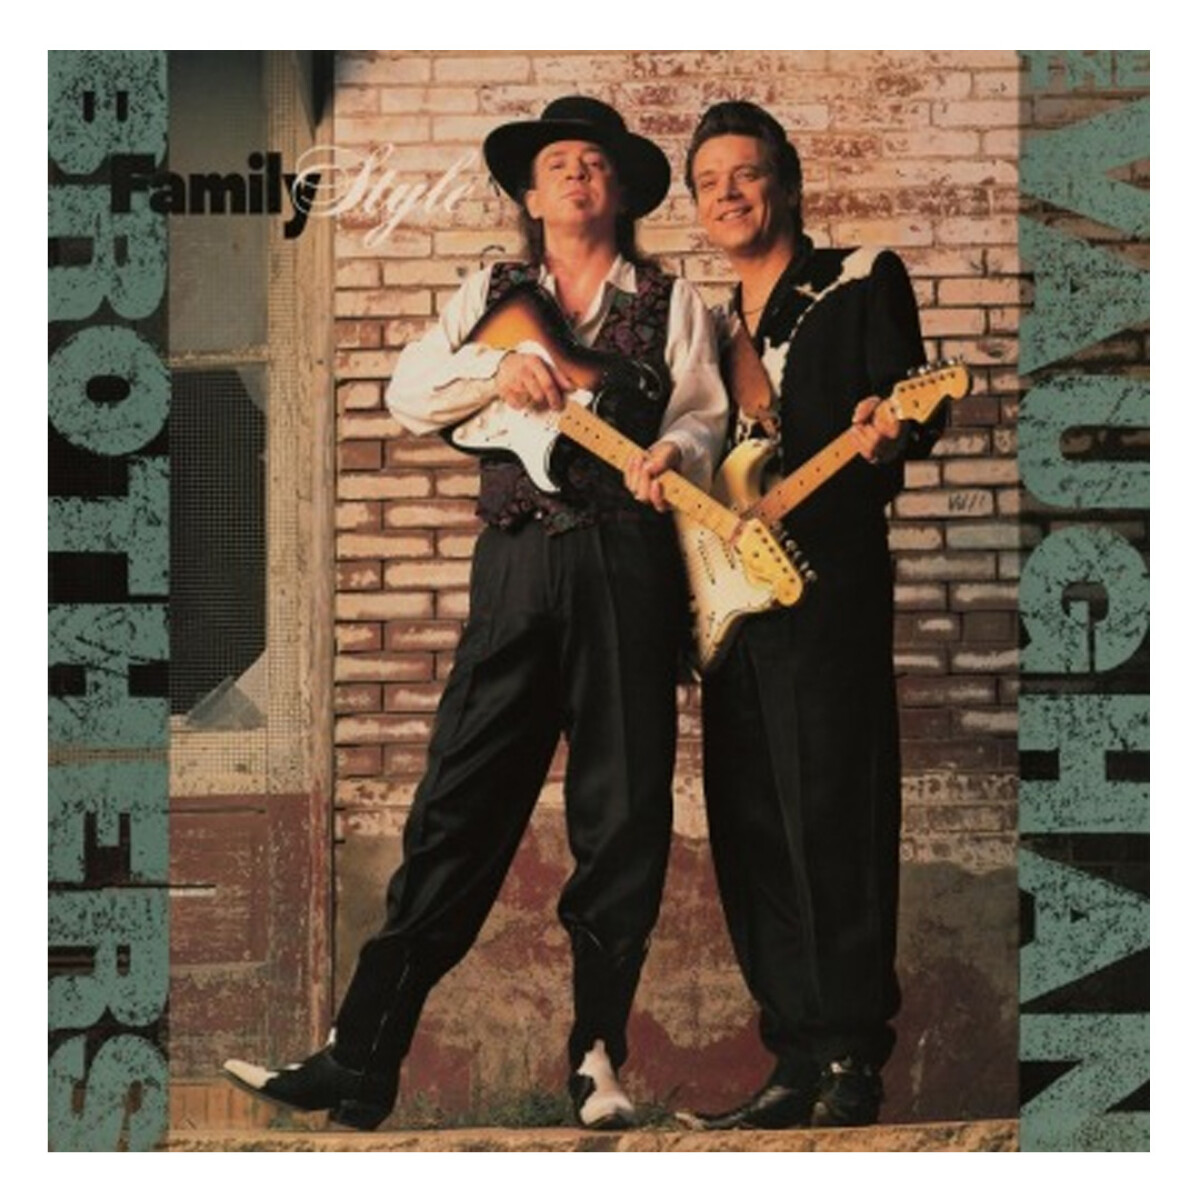 Vaughan Brothers - Family Style - Vinilo 